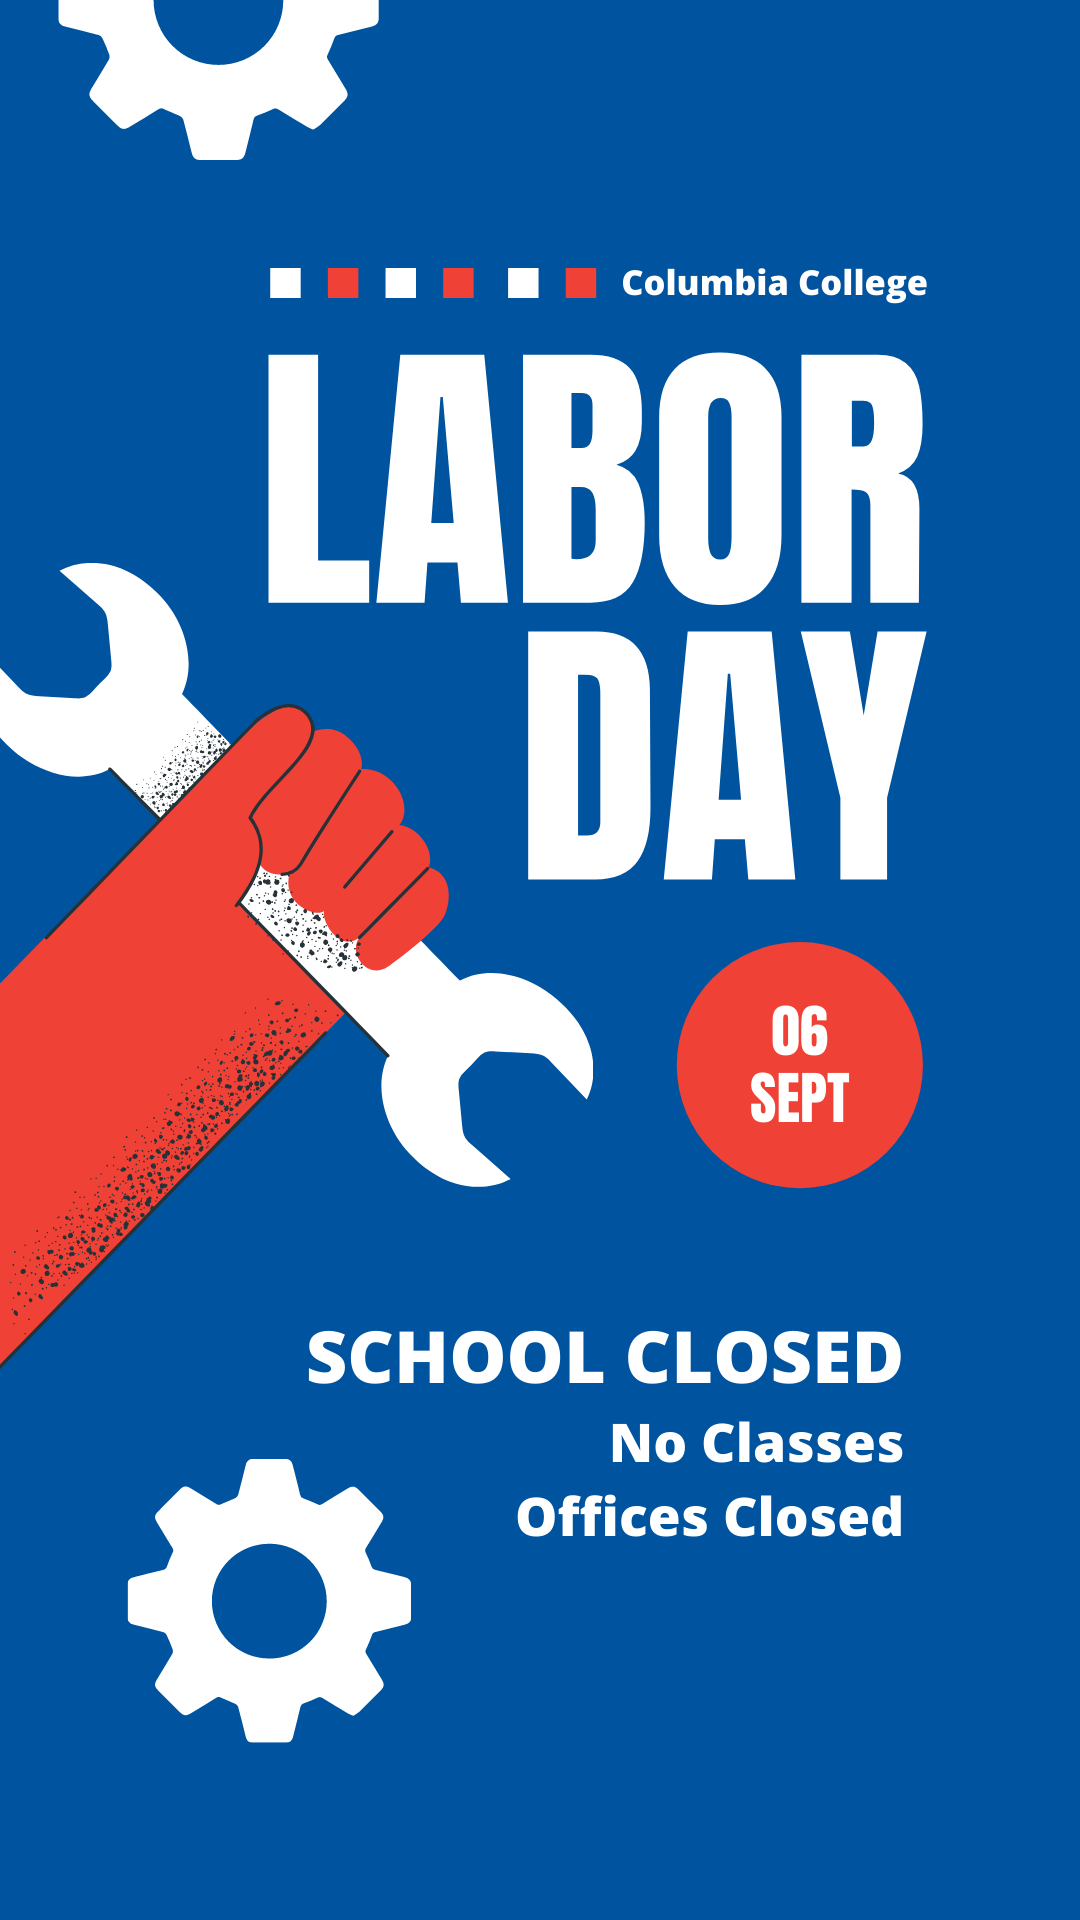 School Closed Labor Day September 6, 2021 Columbia College